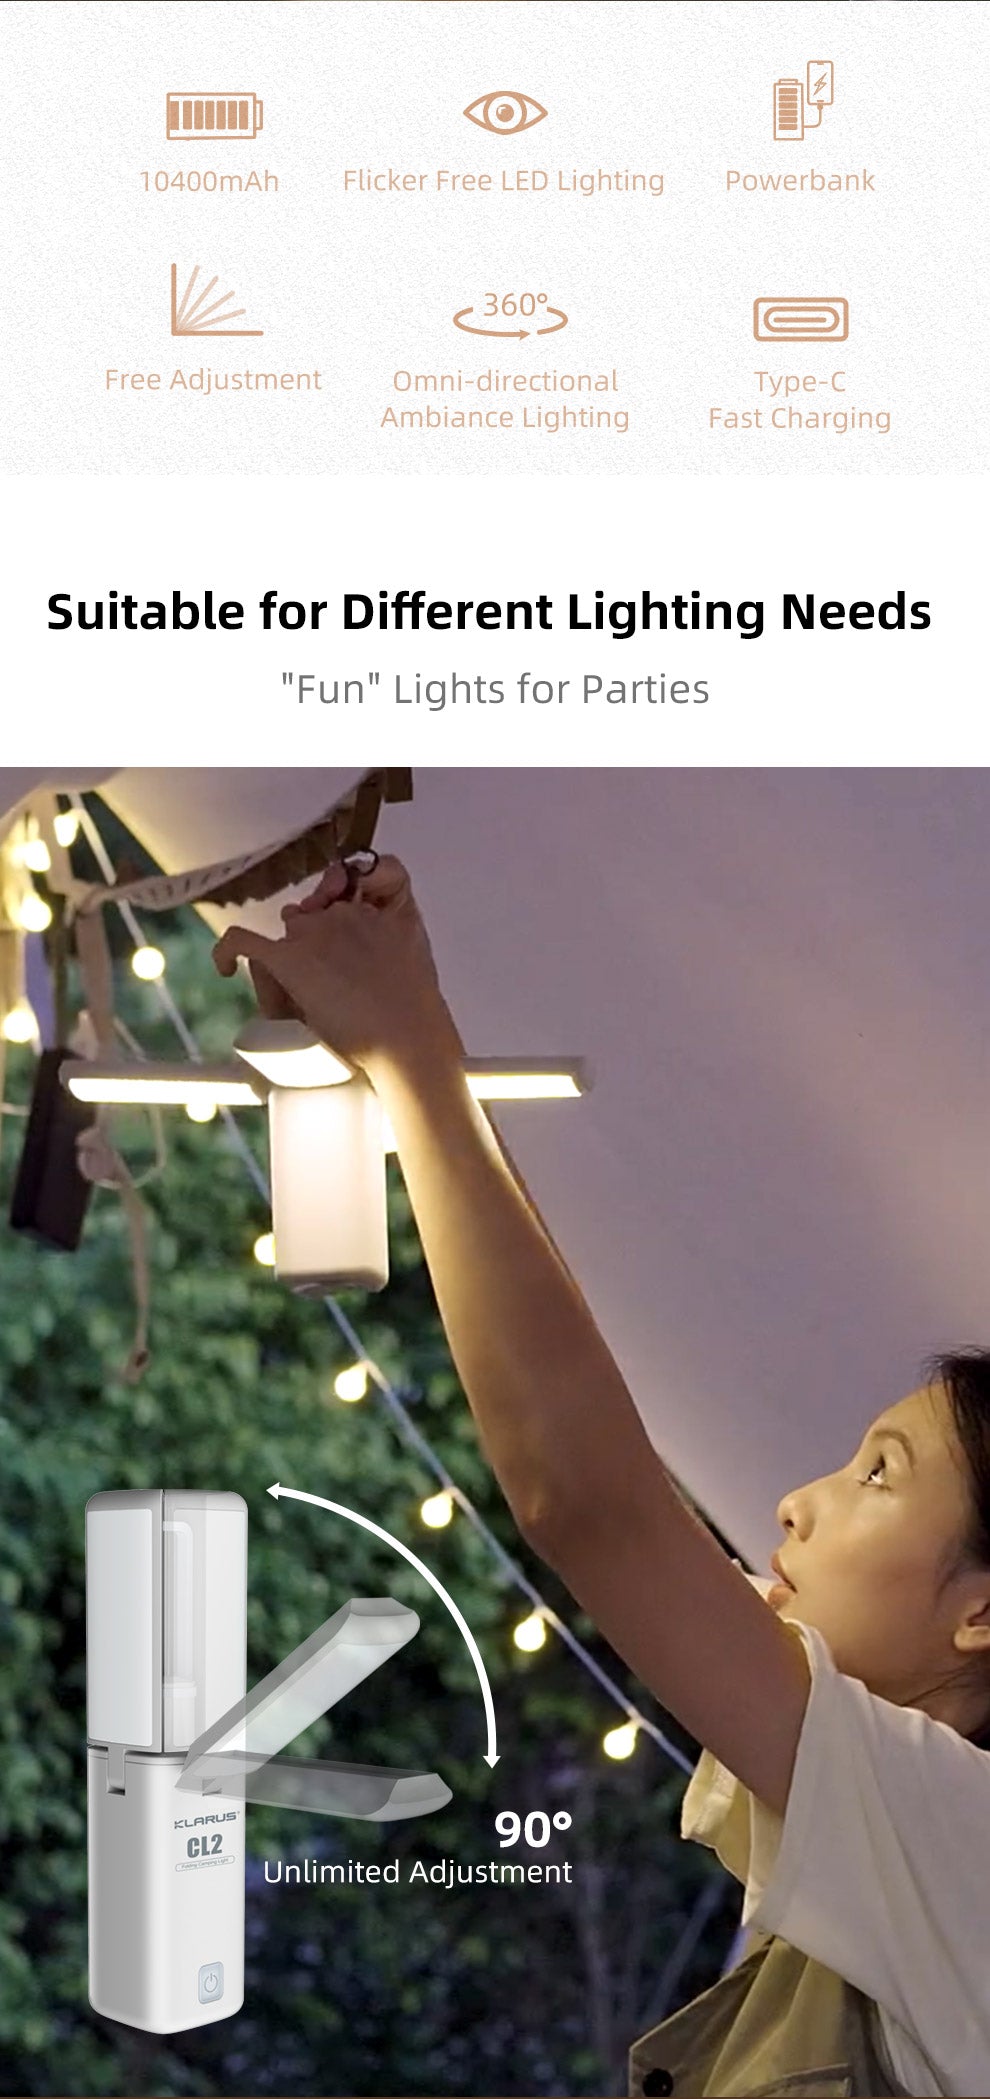 Suitable for Different Lighting Need